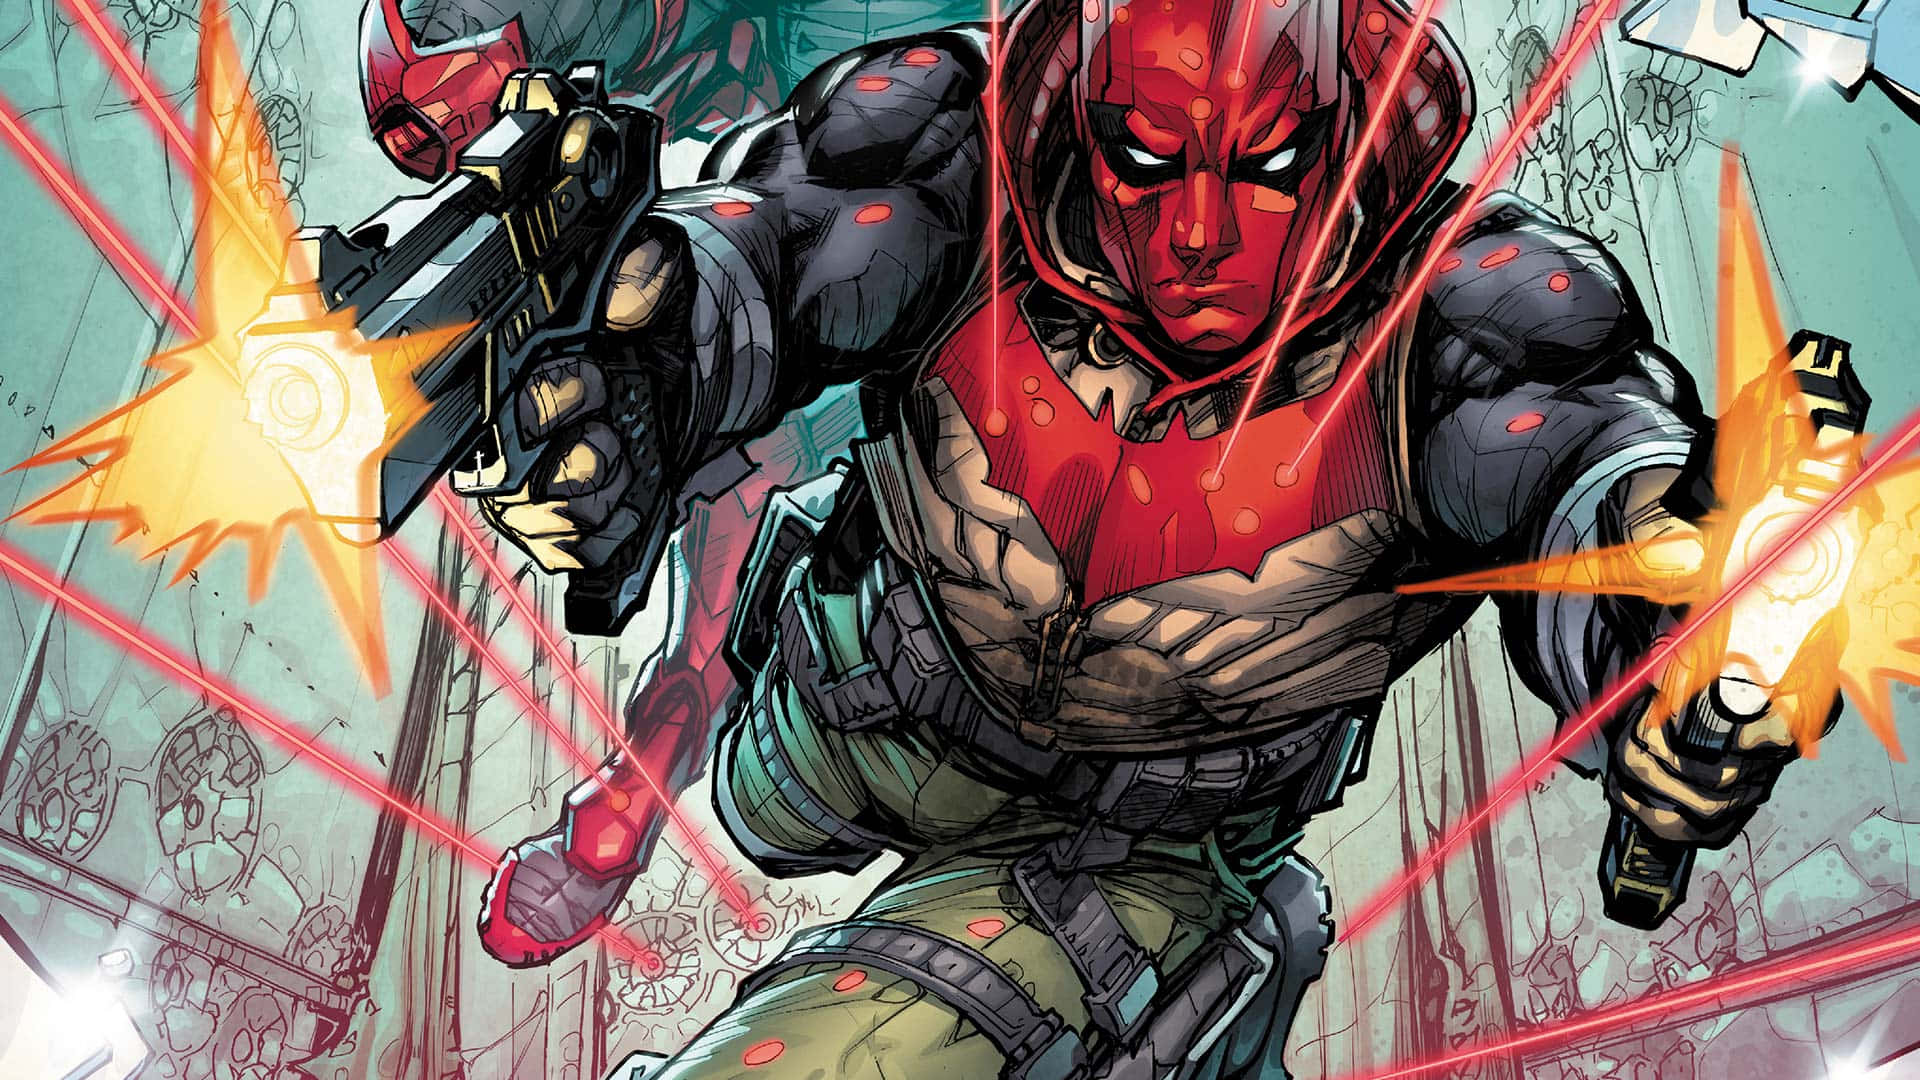 "The Red Hood Back in Action"